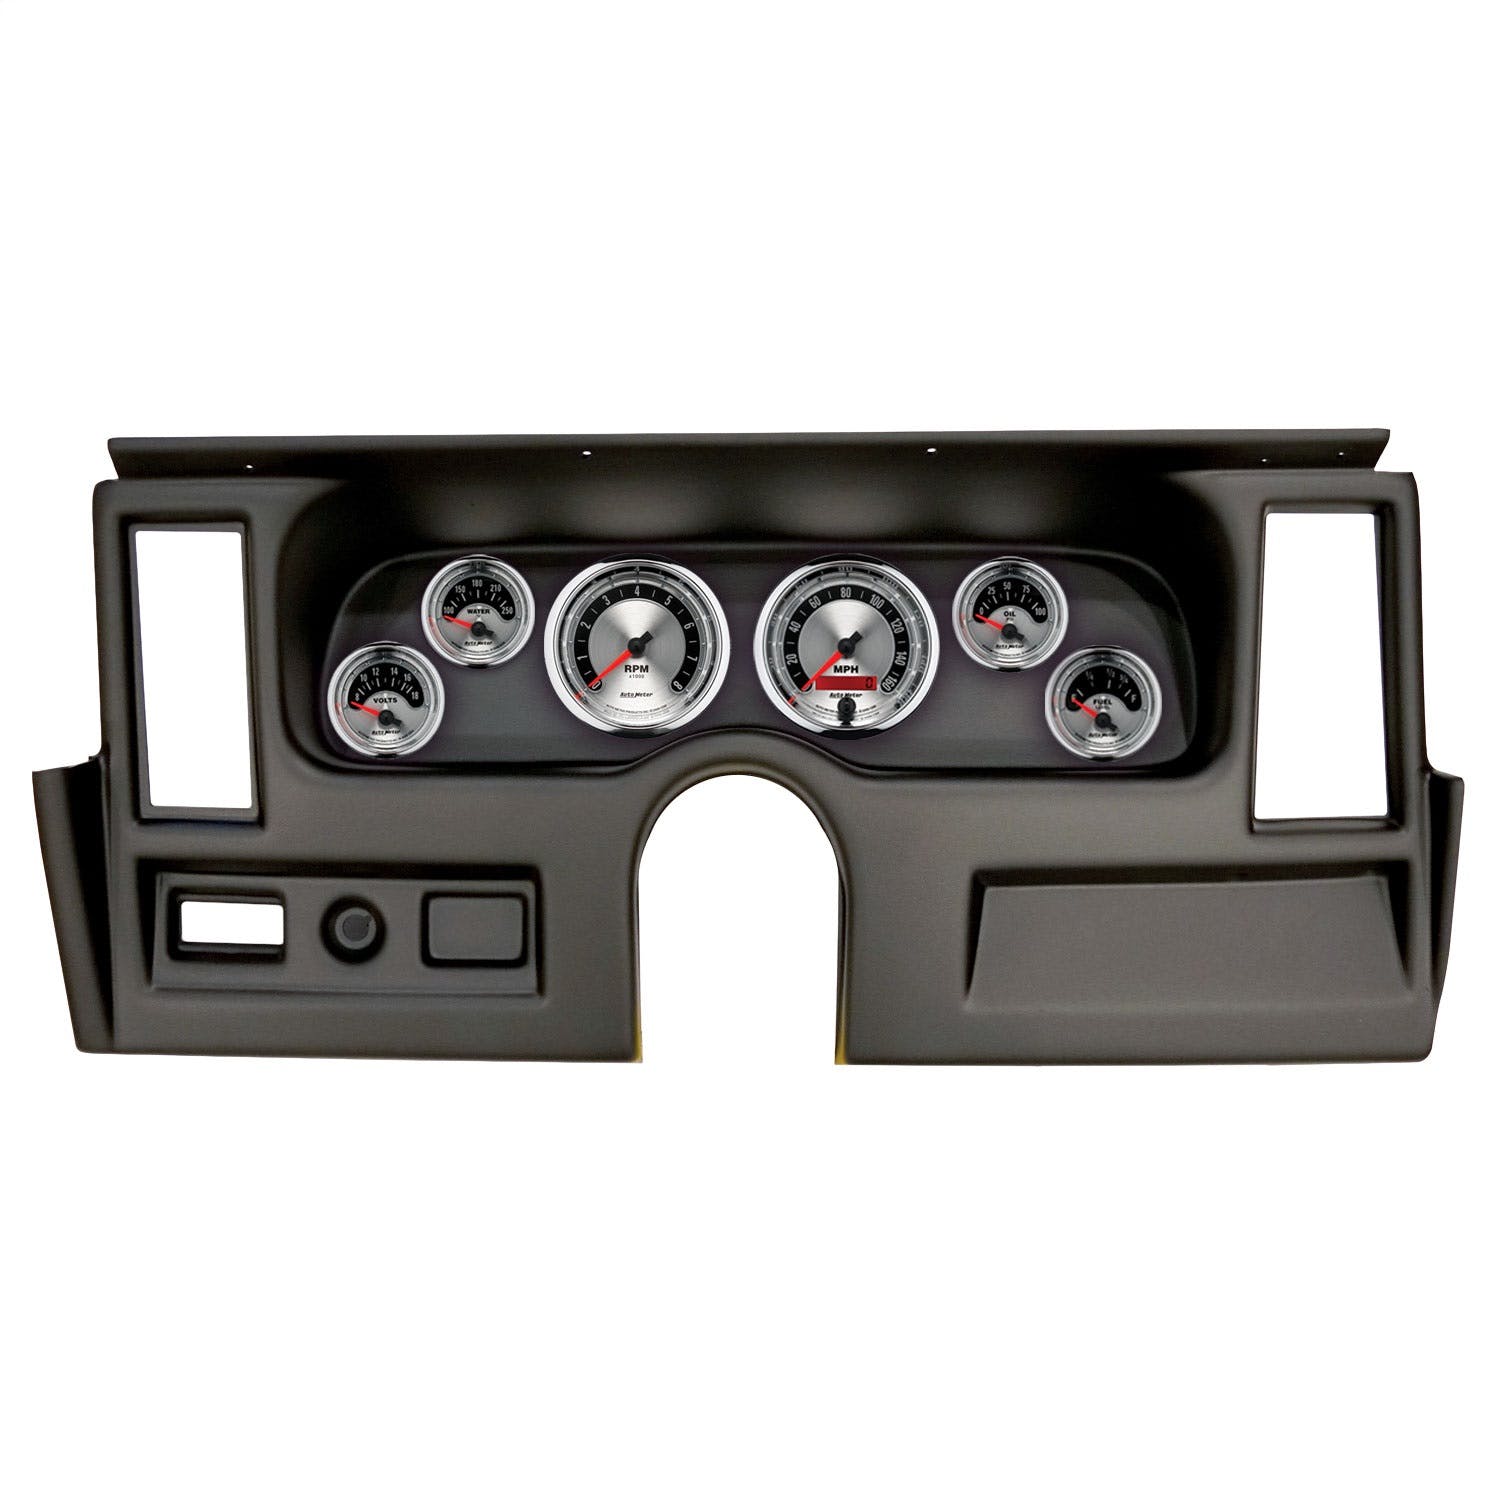 AutoMeter Products 2916-01 6 Gauge Direct-Fit Dash Kit, Chevy Nova 77-79, American Muscle